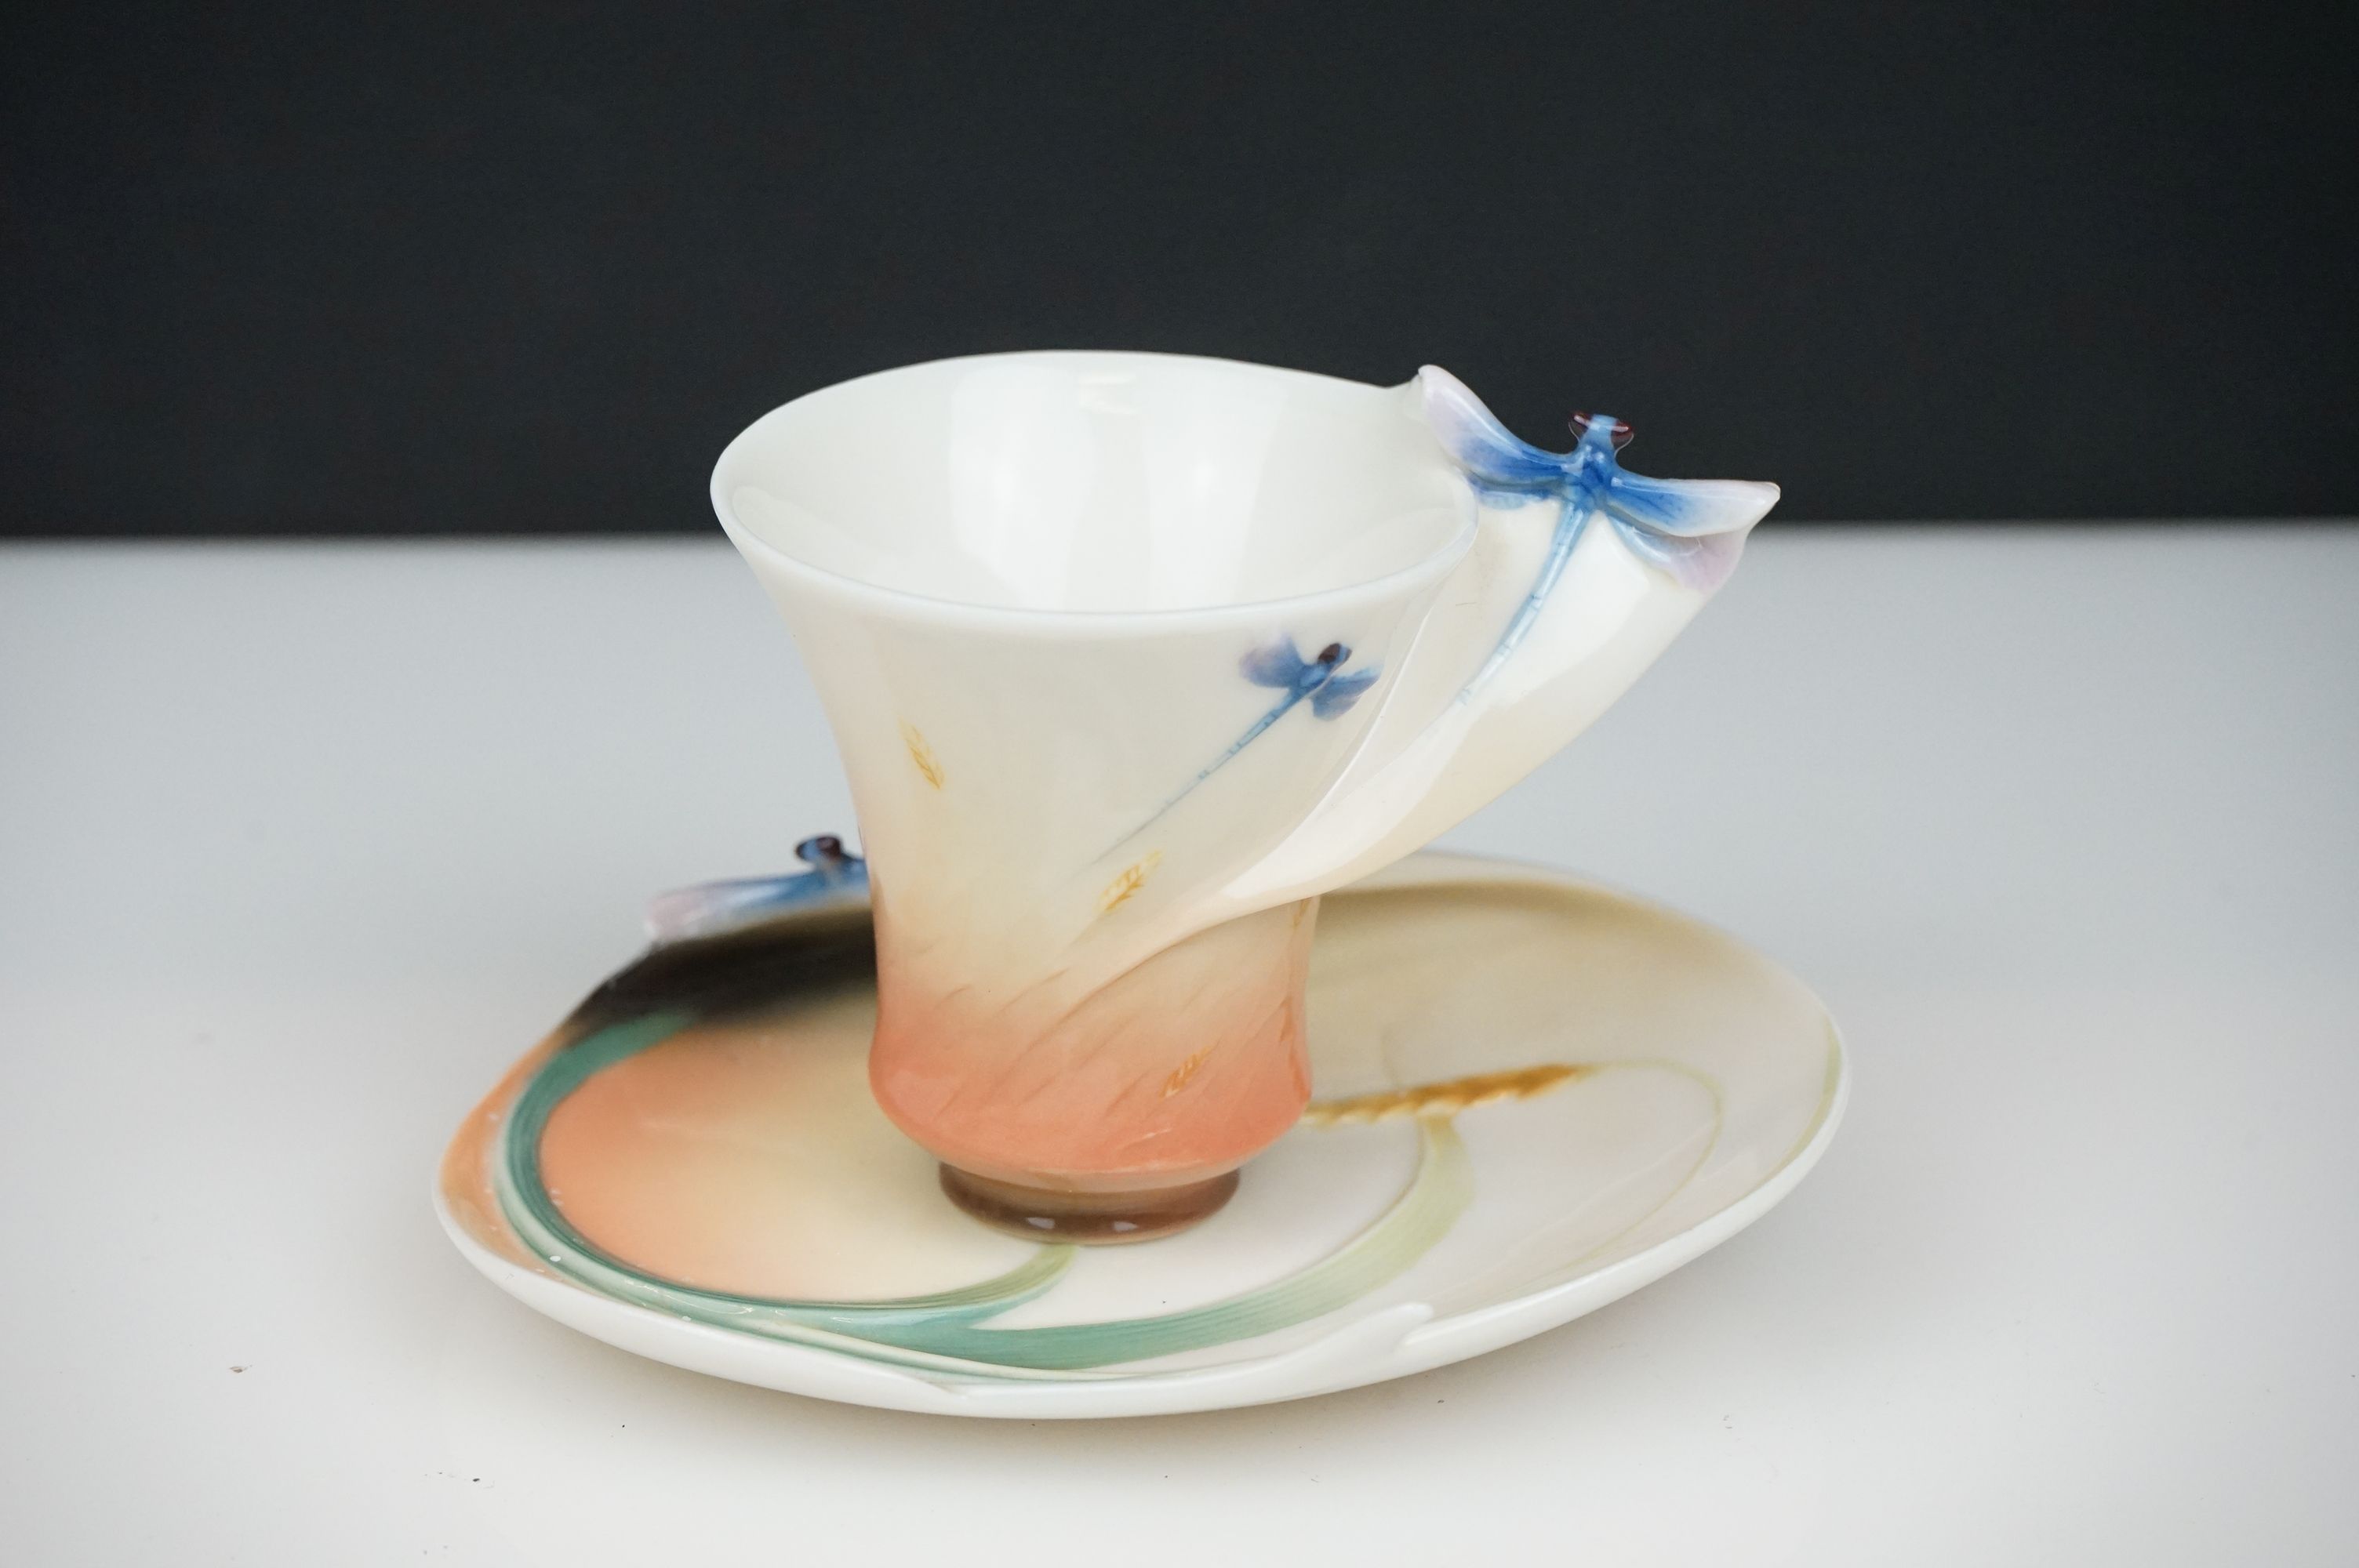 Franz Porcelain ' Dragonfly collection ' Tea ware including Tea Pot and Two Pairs of Cups and - Image 4 of 8